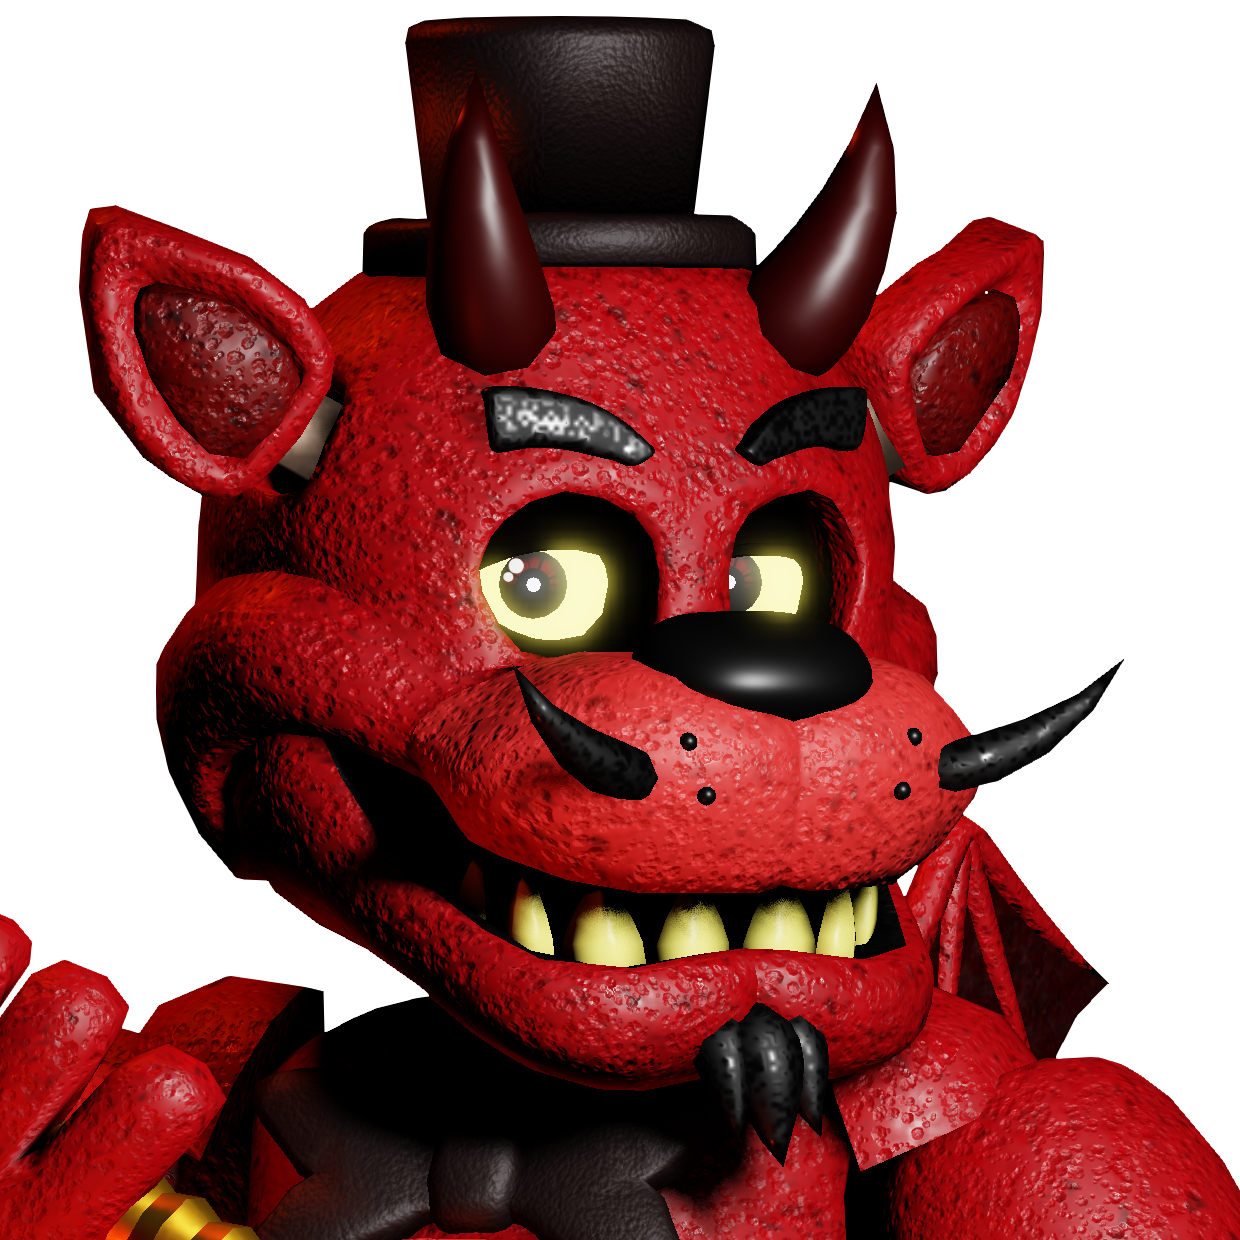 This FNAF 6 Remake Is INSANE  Five Night's at Freddy's 6: Freakshow 